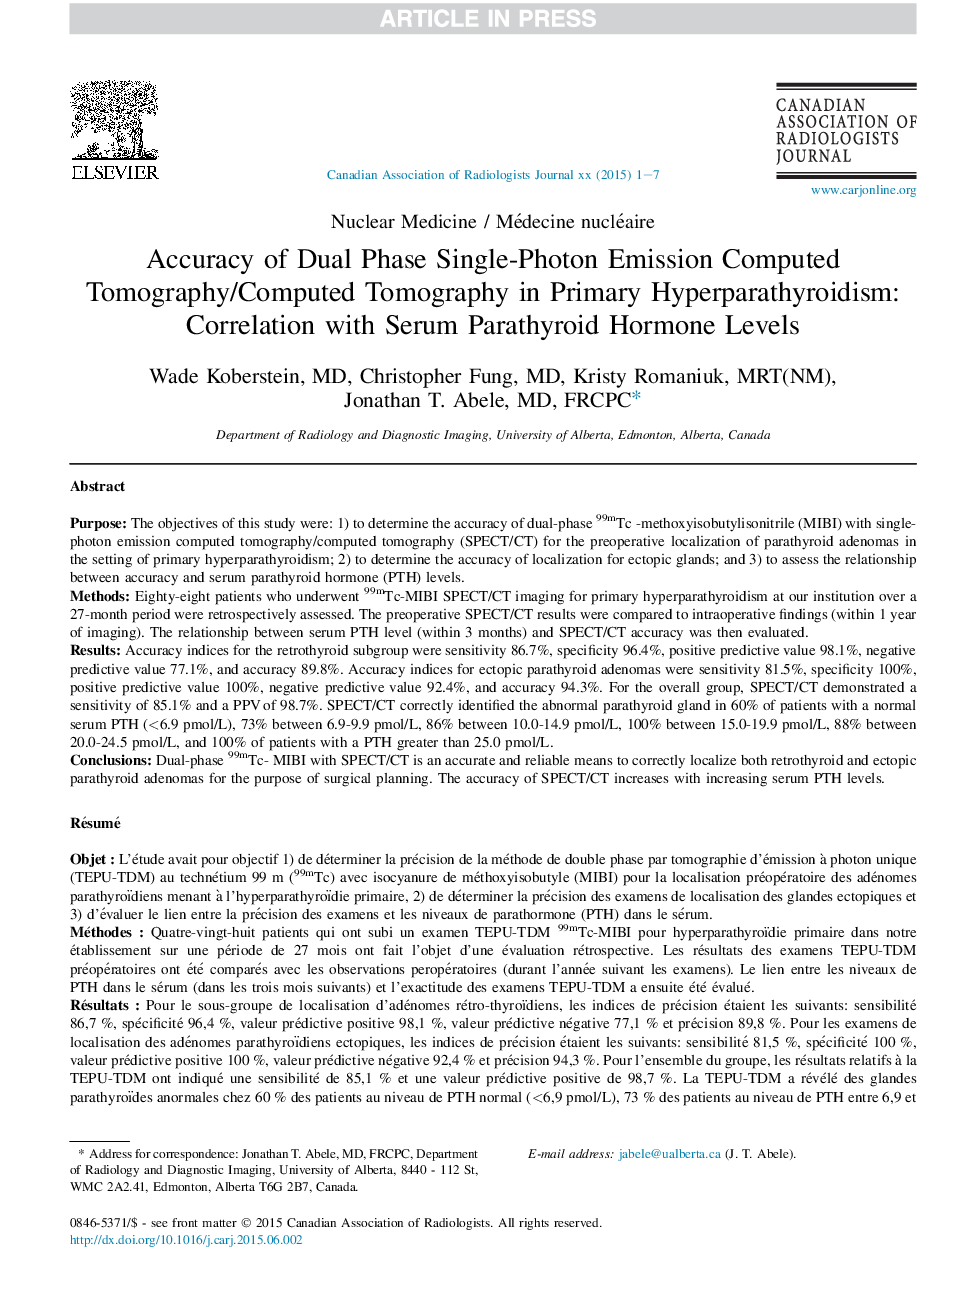 Accuracy of Dual Phase Single-Photon Emission Computed Tomography/Computed Tomography in Primary Hyperparathyroidism: Correlation WithÂ Serum Parathyroid Hormone Levels